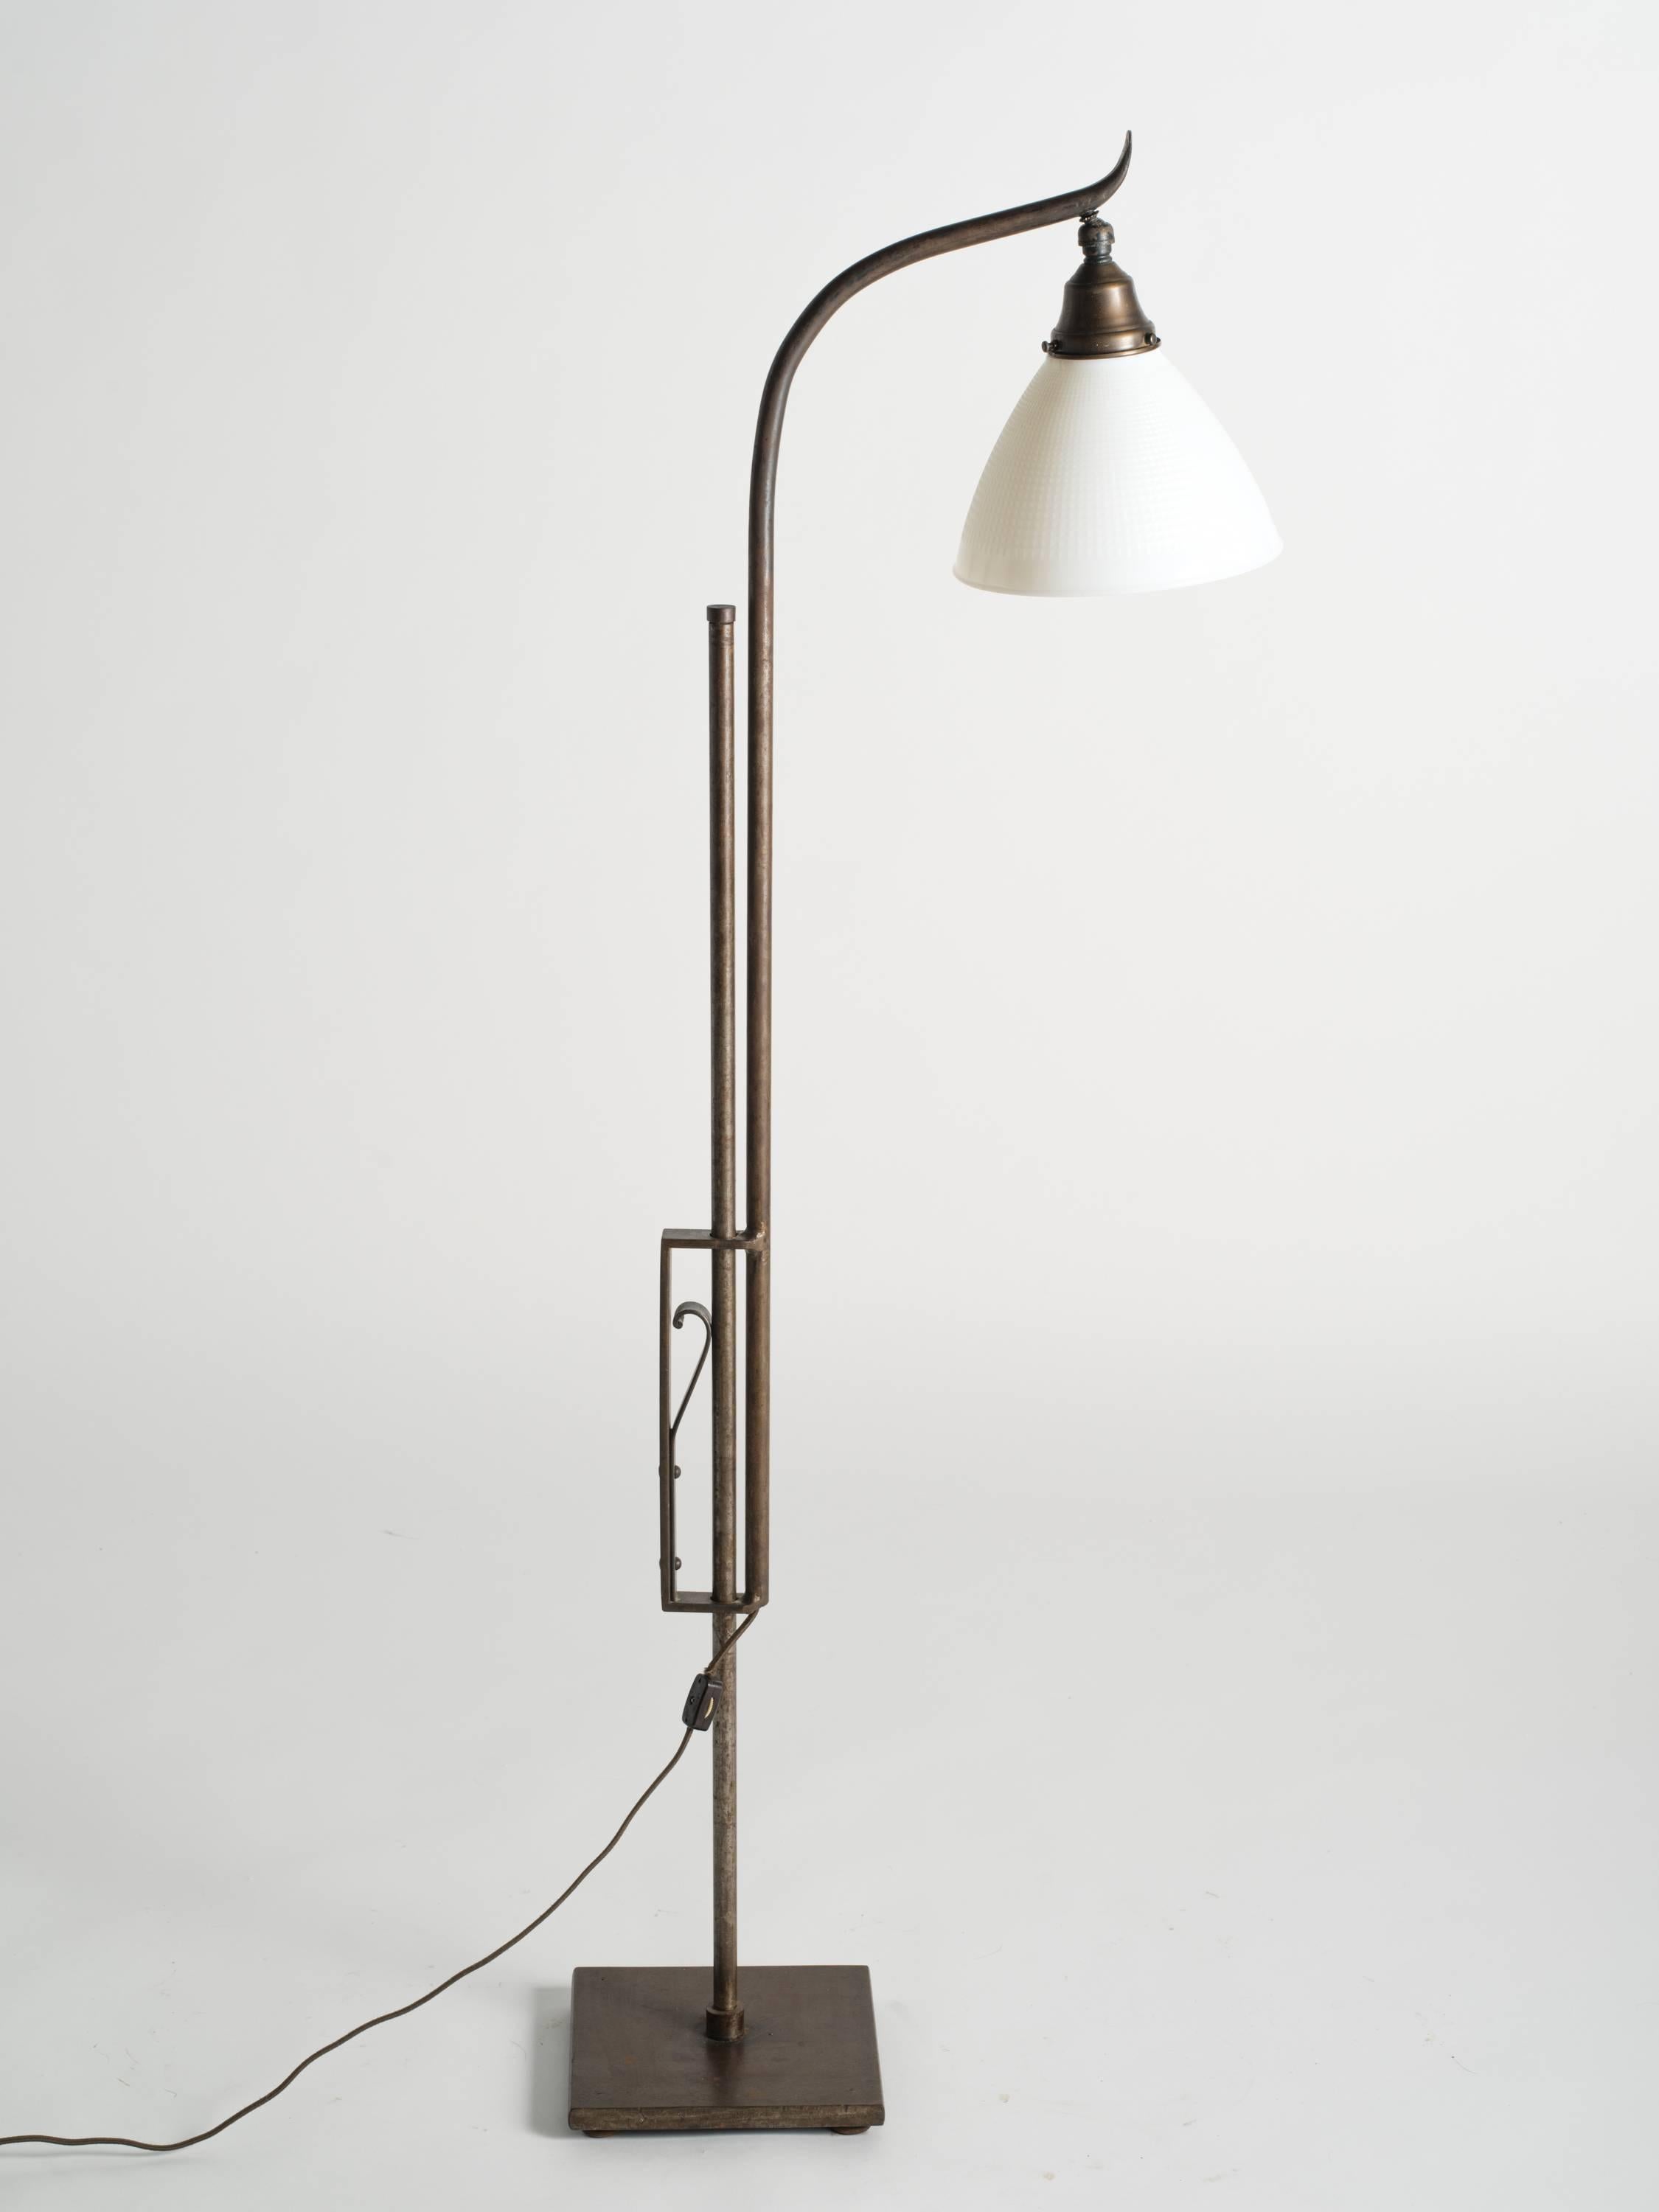 Iron Art Deco style adjustable height floor lamp with milk glass shade. Measure: Height adjusts from 38